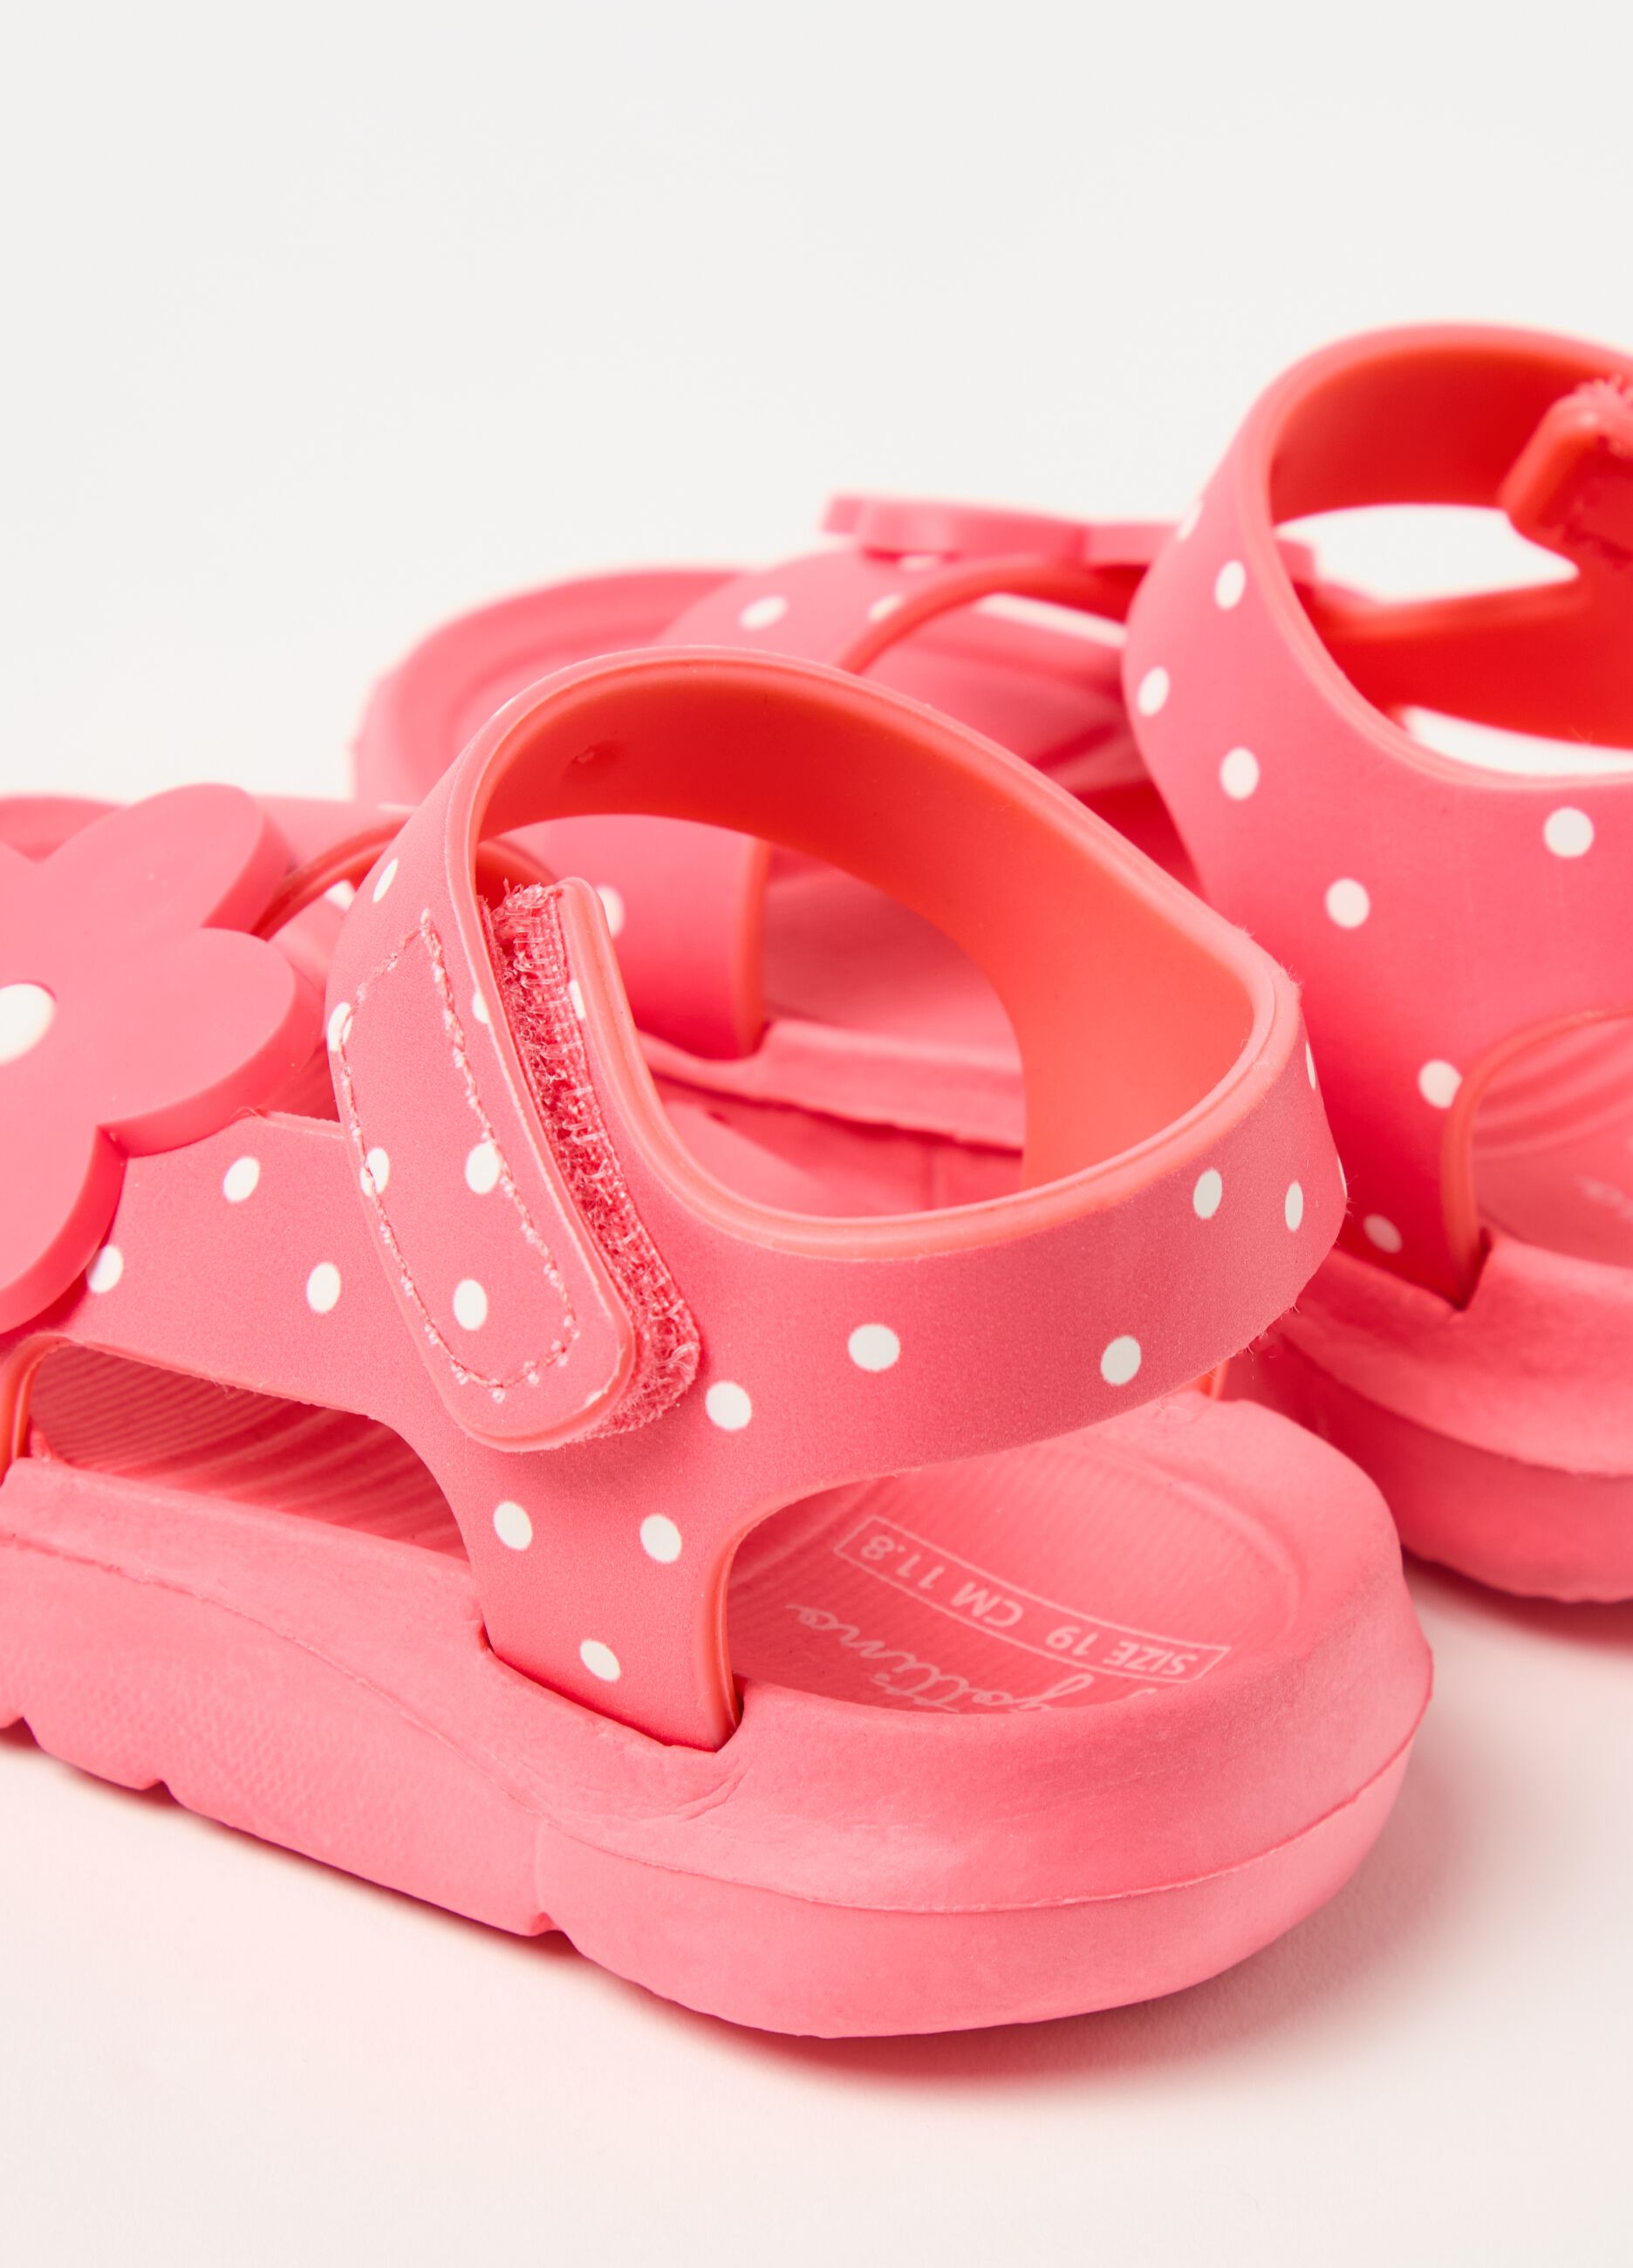 Sandals with polka dot pattern and flower